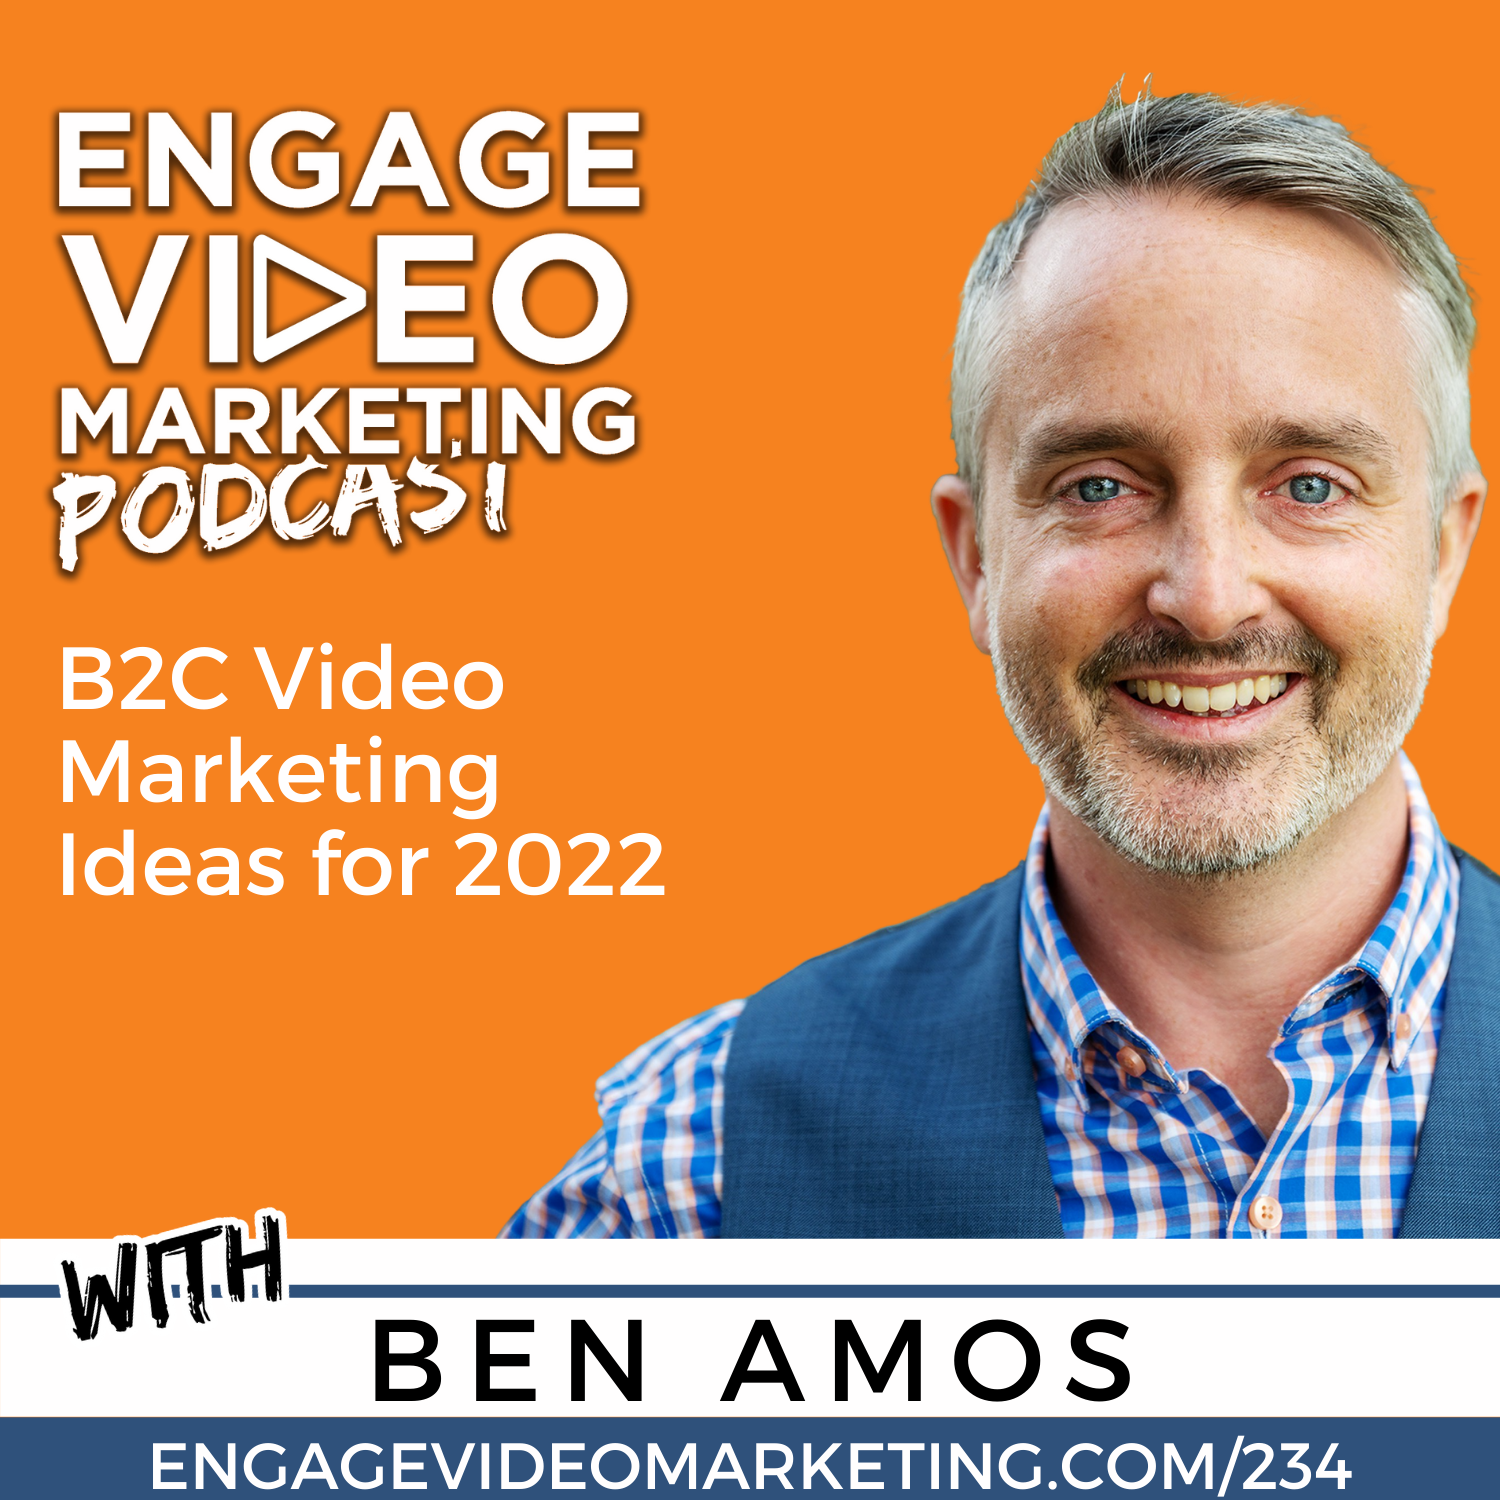 B2C Video Marketing Ideas for 2022 with Ben Amos